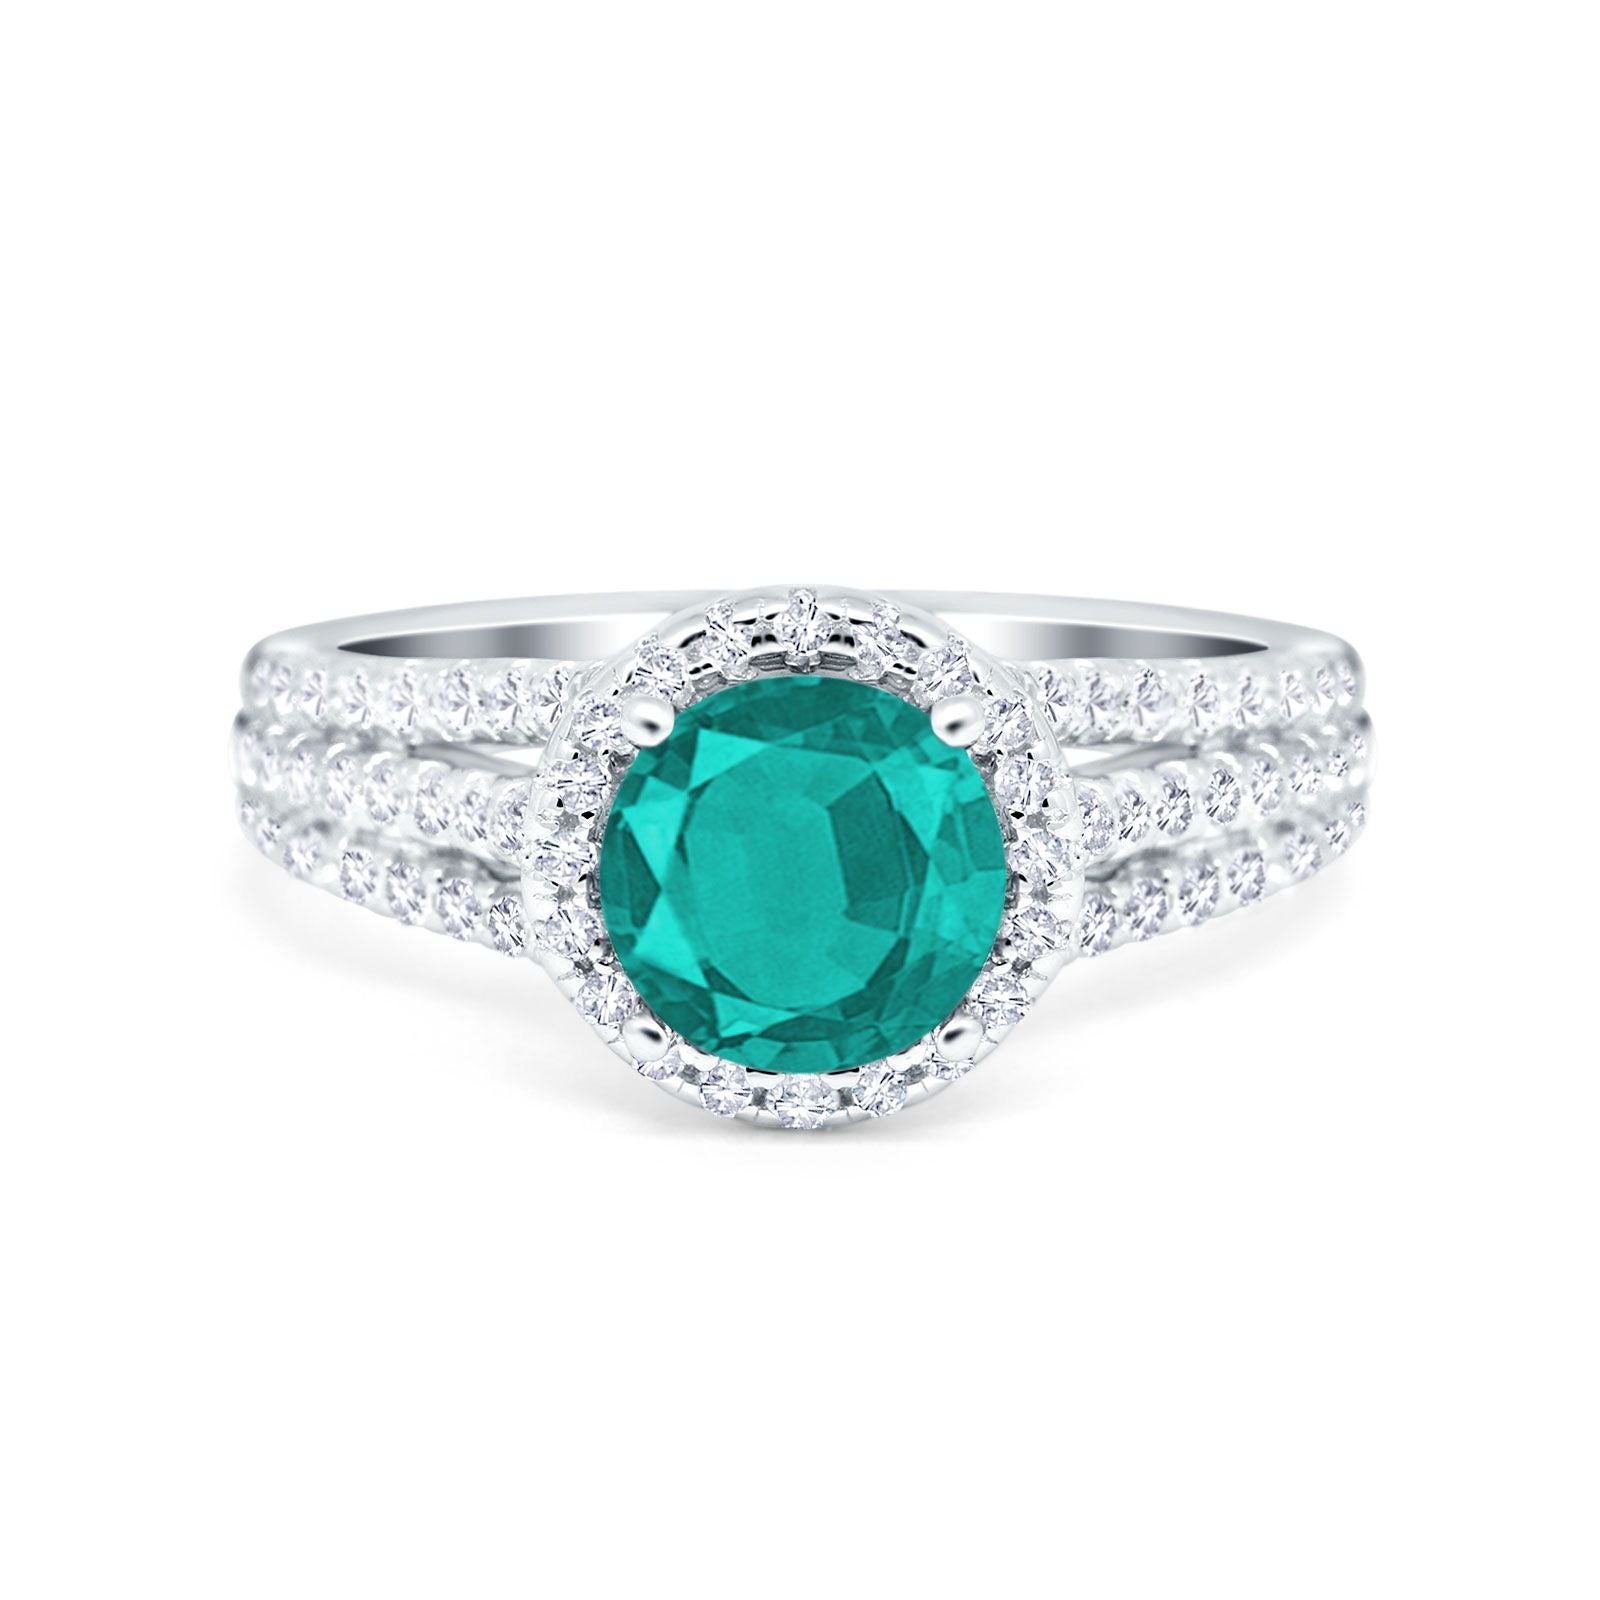 Halo Engagement Ring Accent Dazzling Simulated Paraiba Tourmaline CZ 925 Sterling Silver